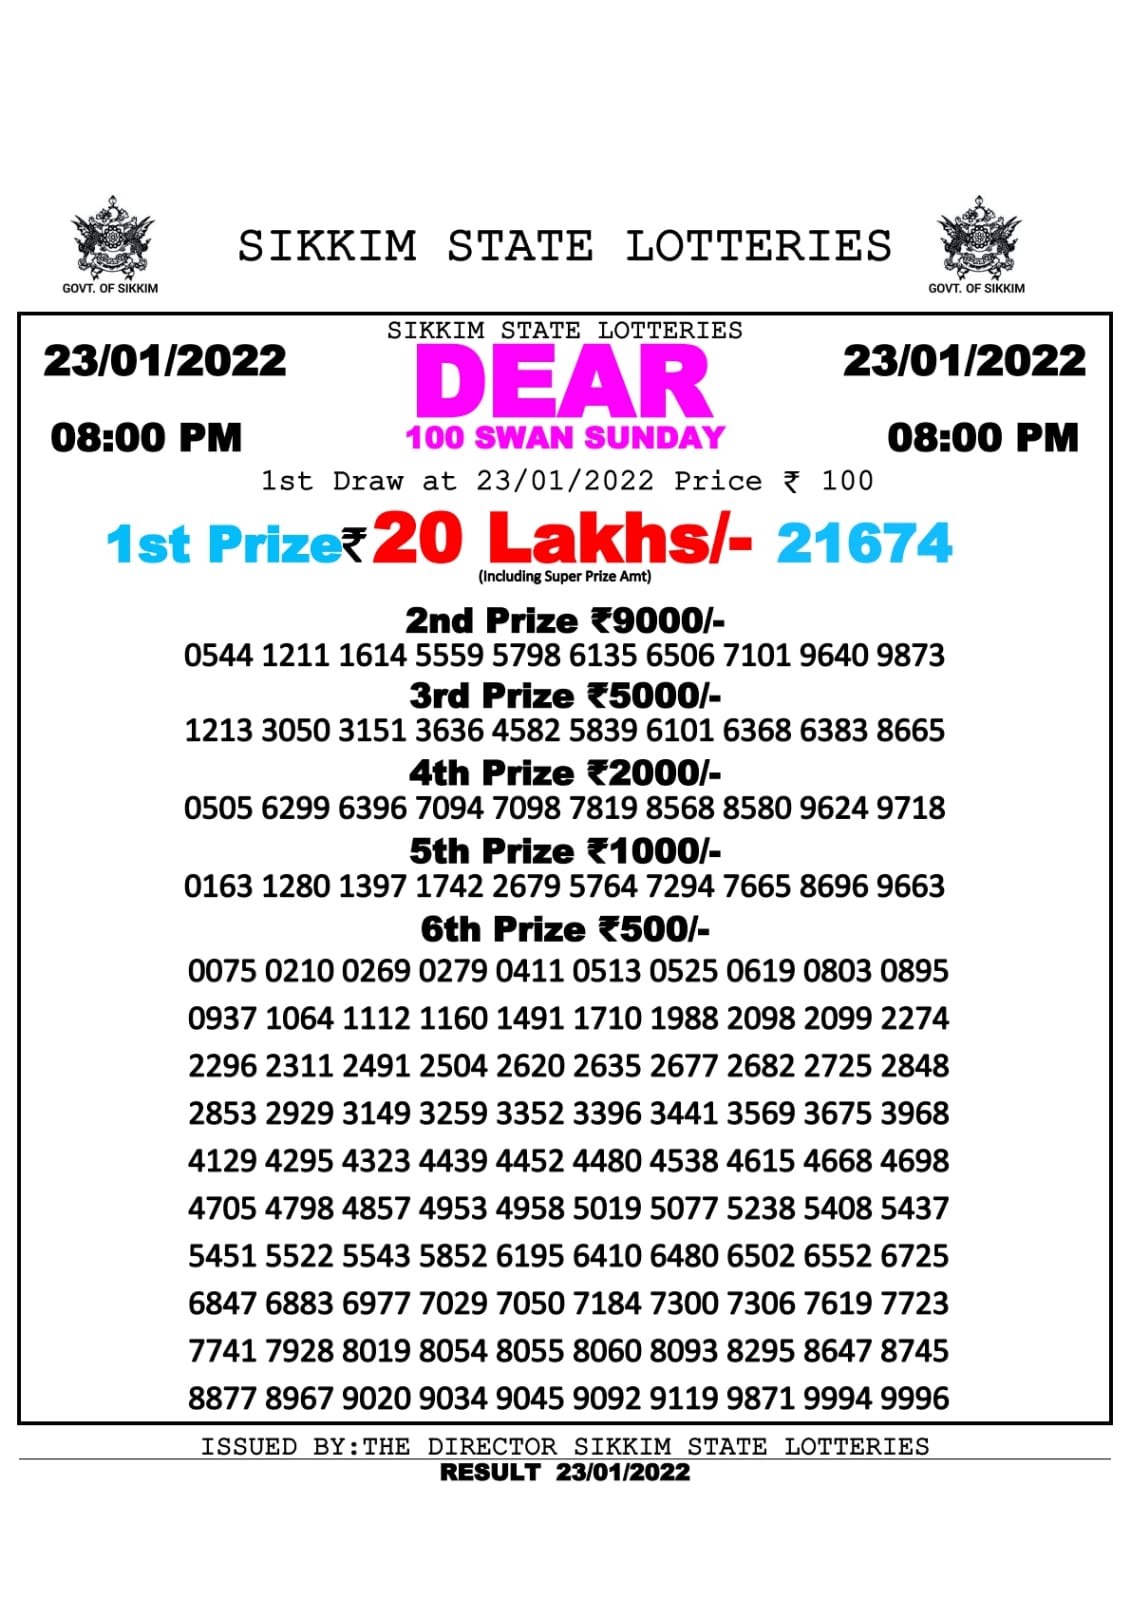 DEAR 100 WEEKLY RESULT 8.00PM 23.01.2022